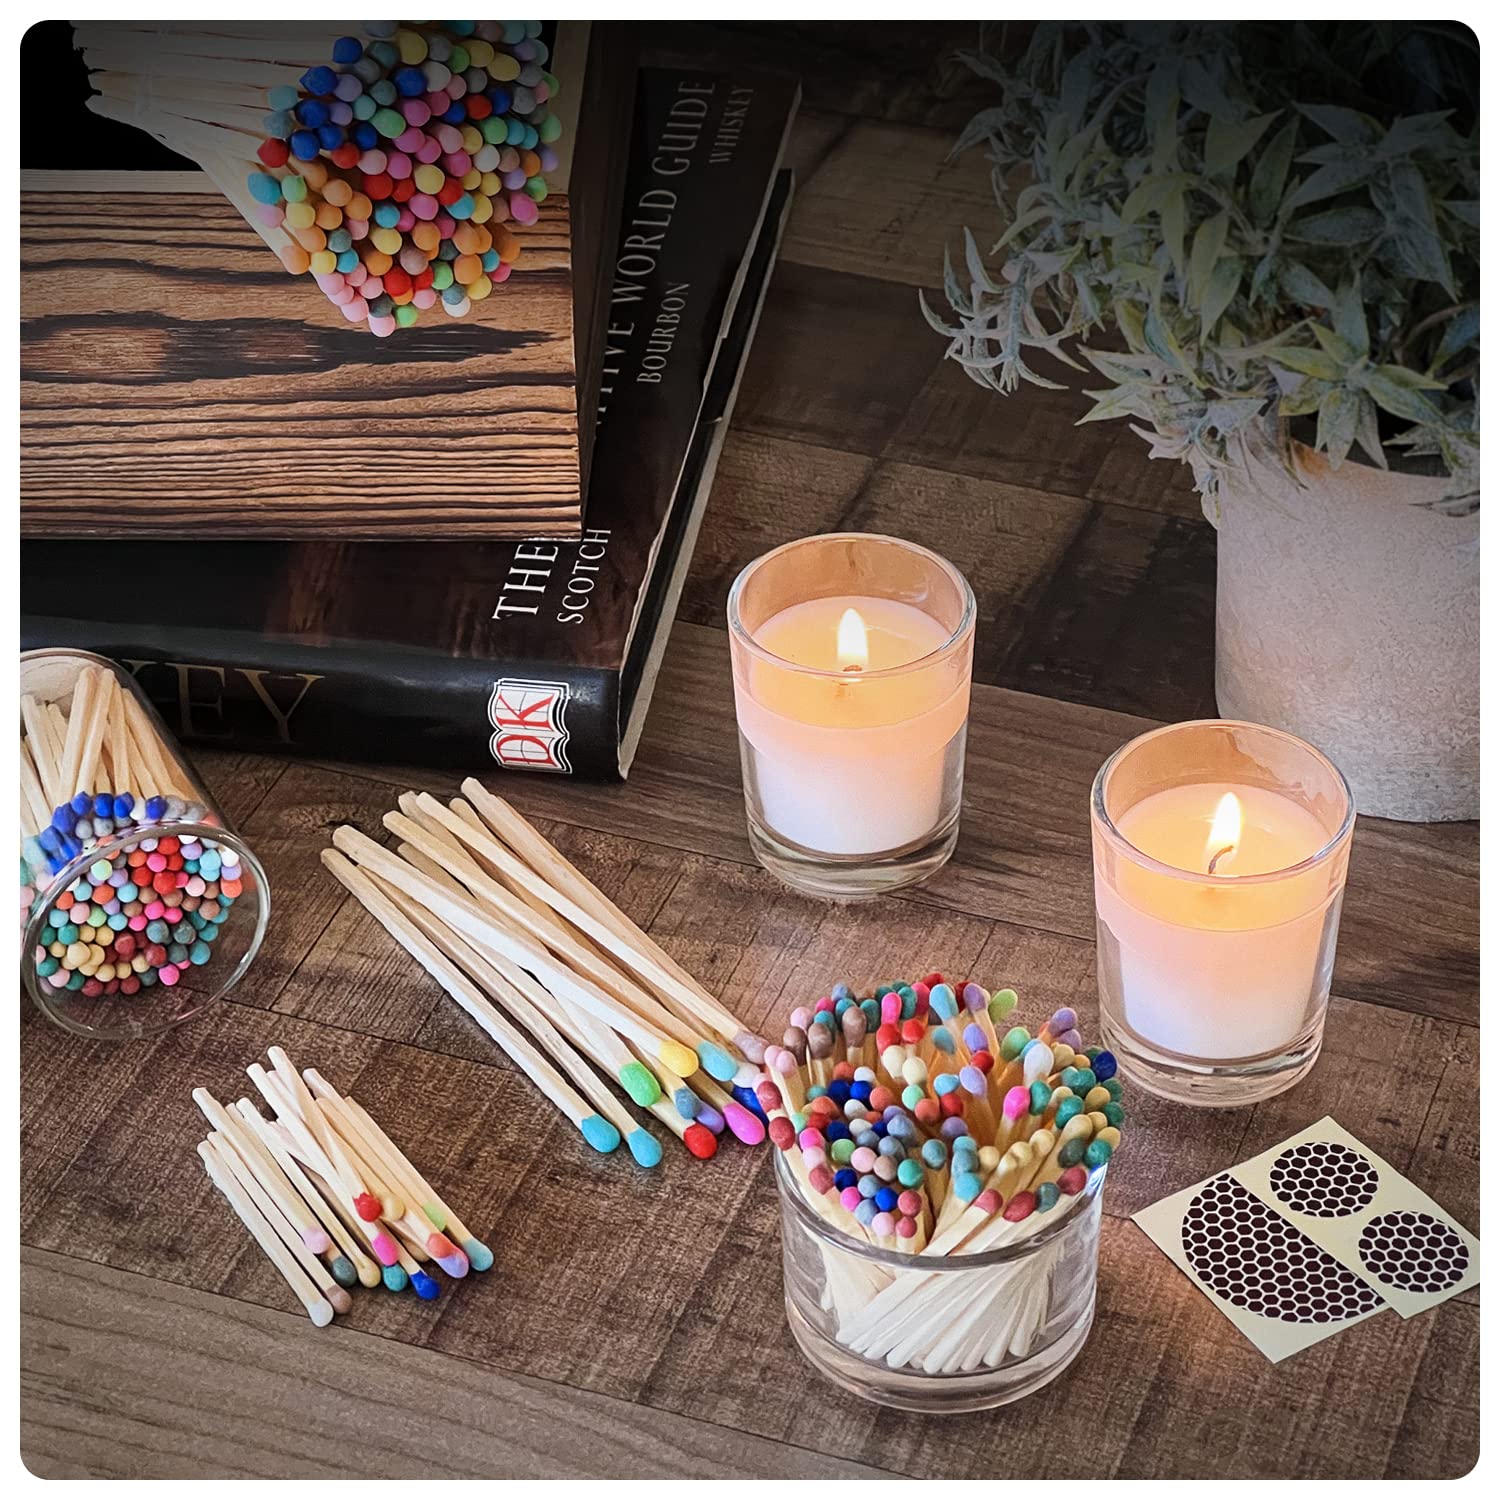  4 Rainbow Matches (100 Count, with Striking Stickers Included), Decorative Unique & Fun for Your Home, Gifts, Accessories & Events